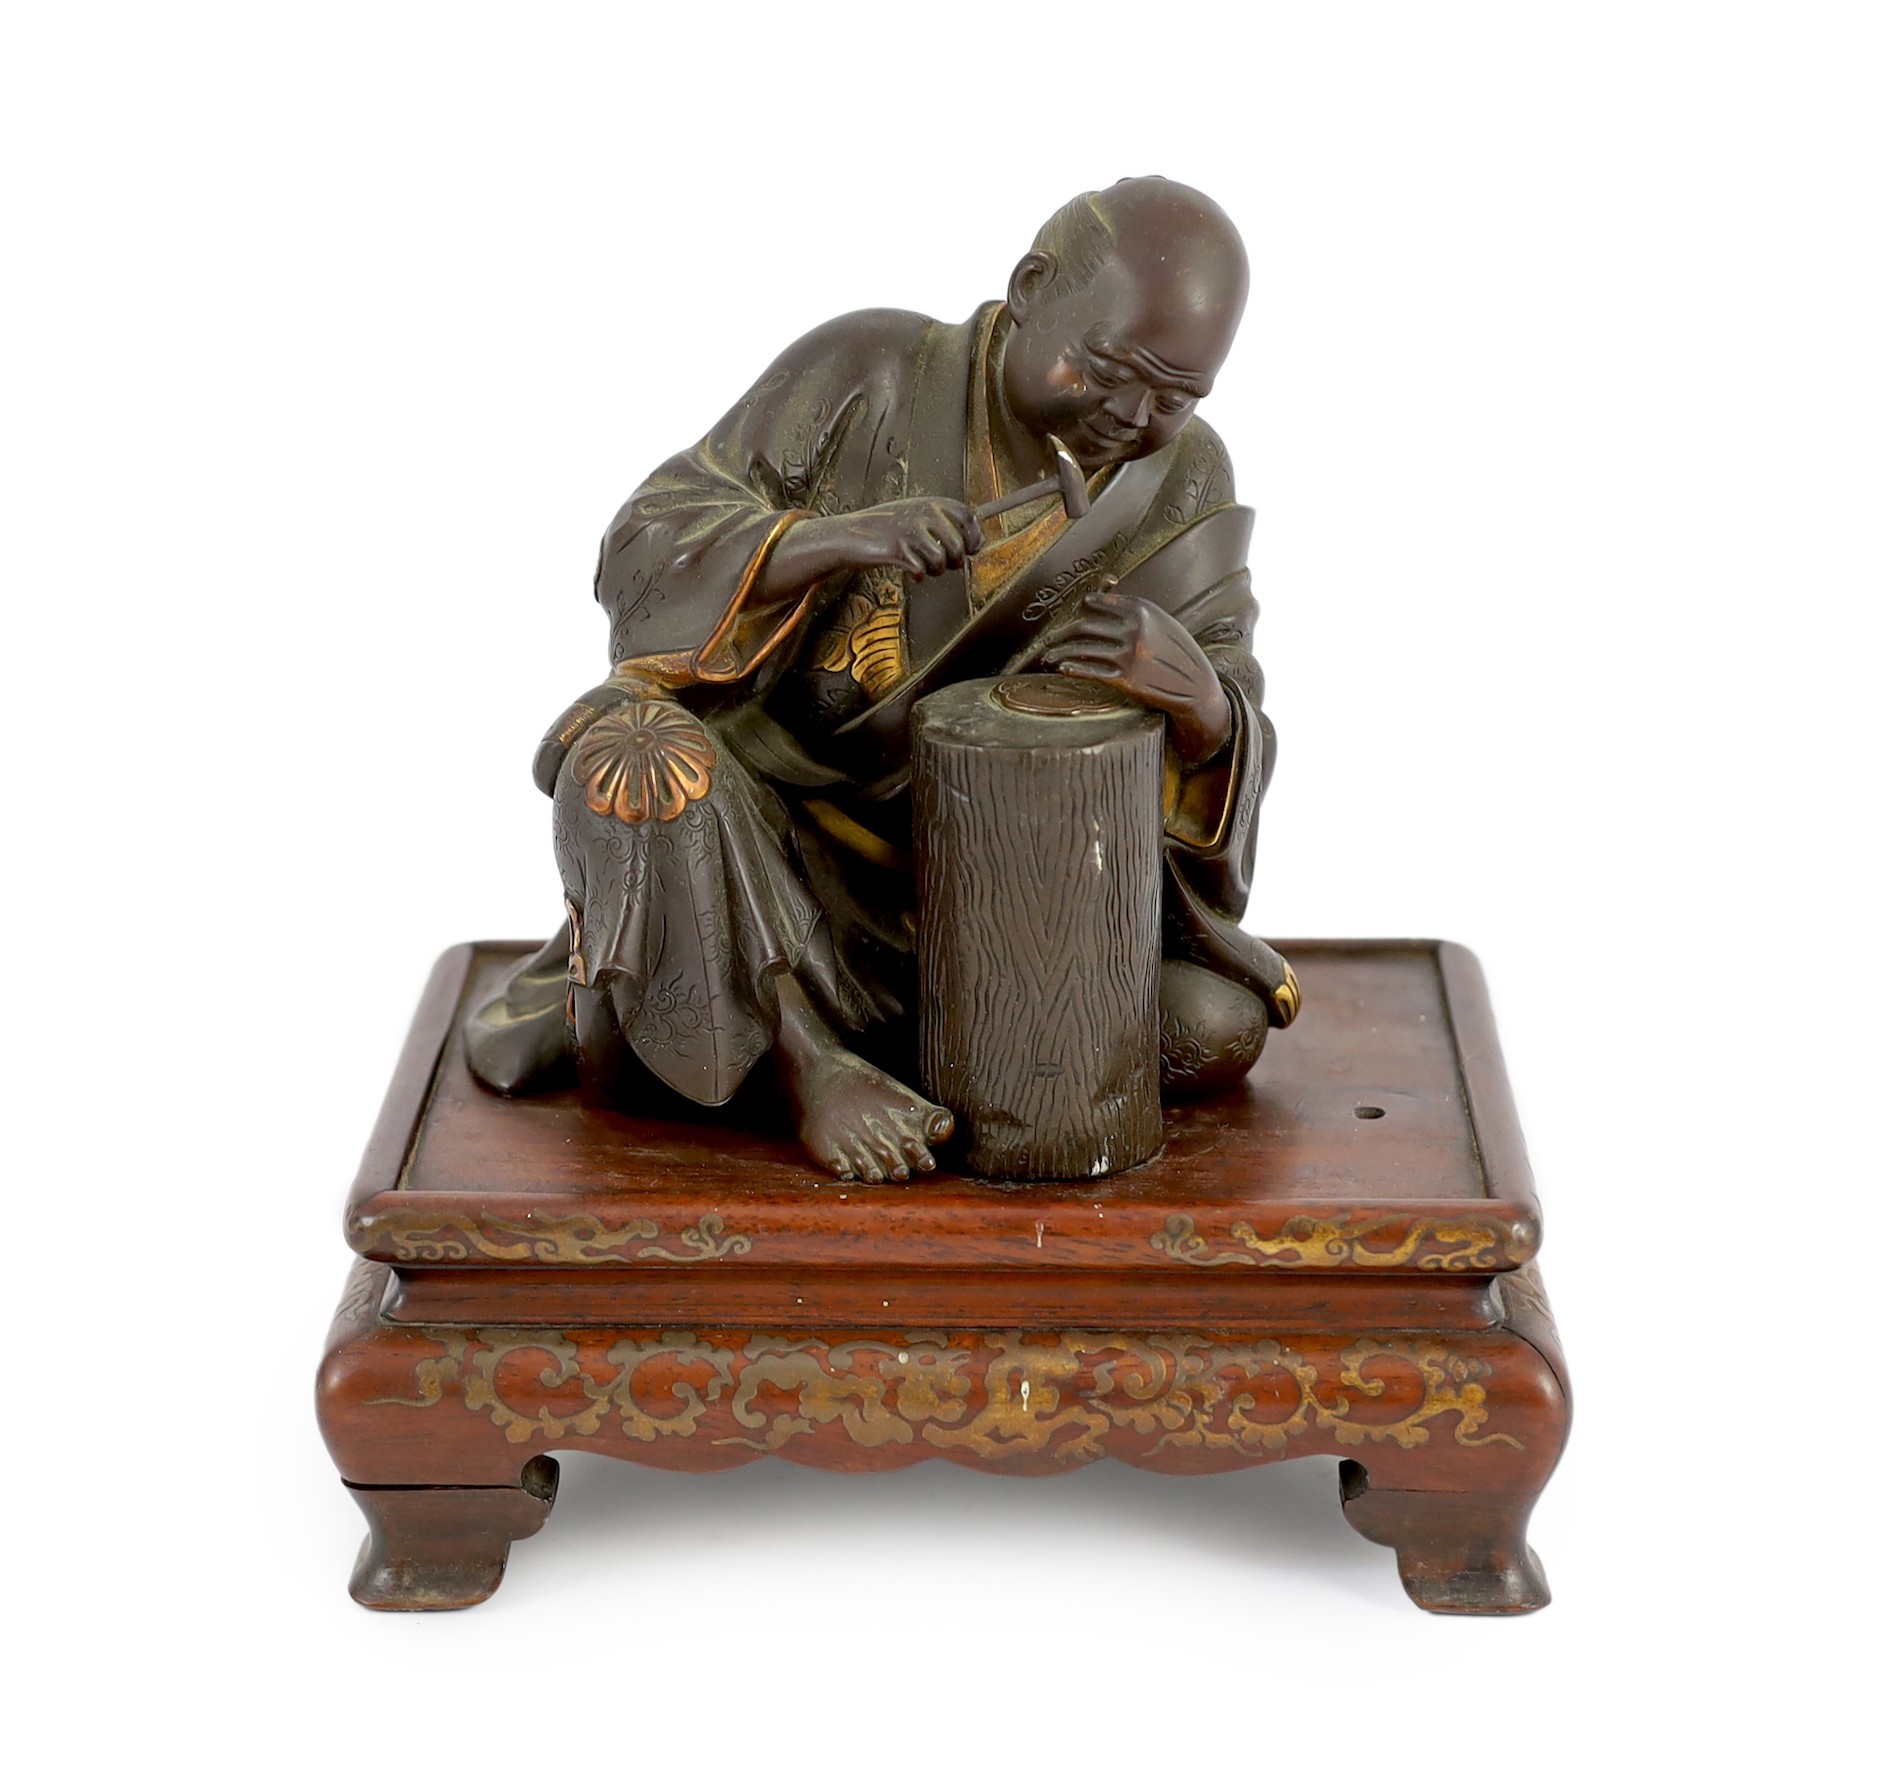 A Japanese bronze model of a sword fittings master craftsman, by Miyao Eisuke, Meiji period, total height 18cm including original gilt lacquered wood stand, small section of bronze lacking                                